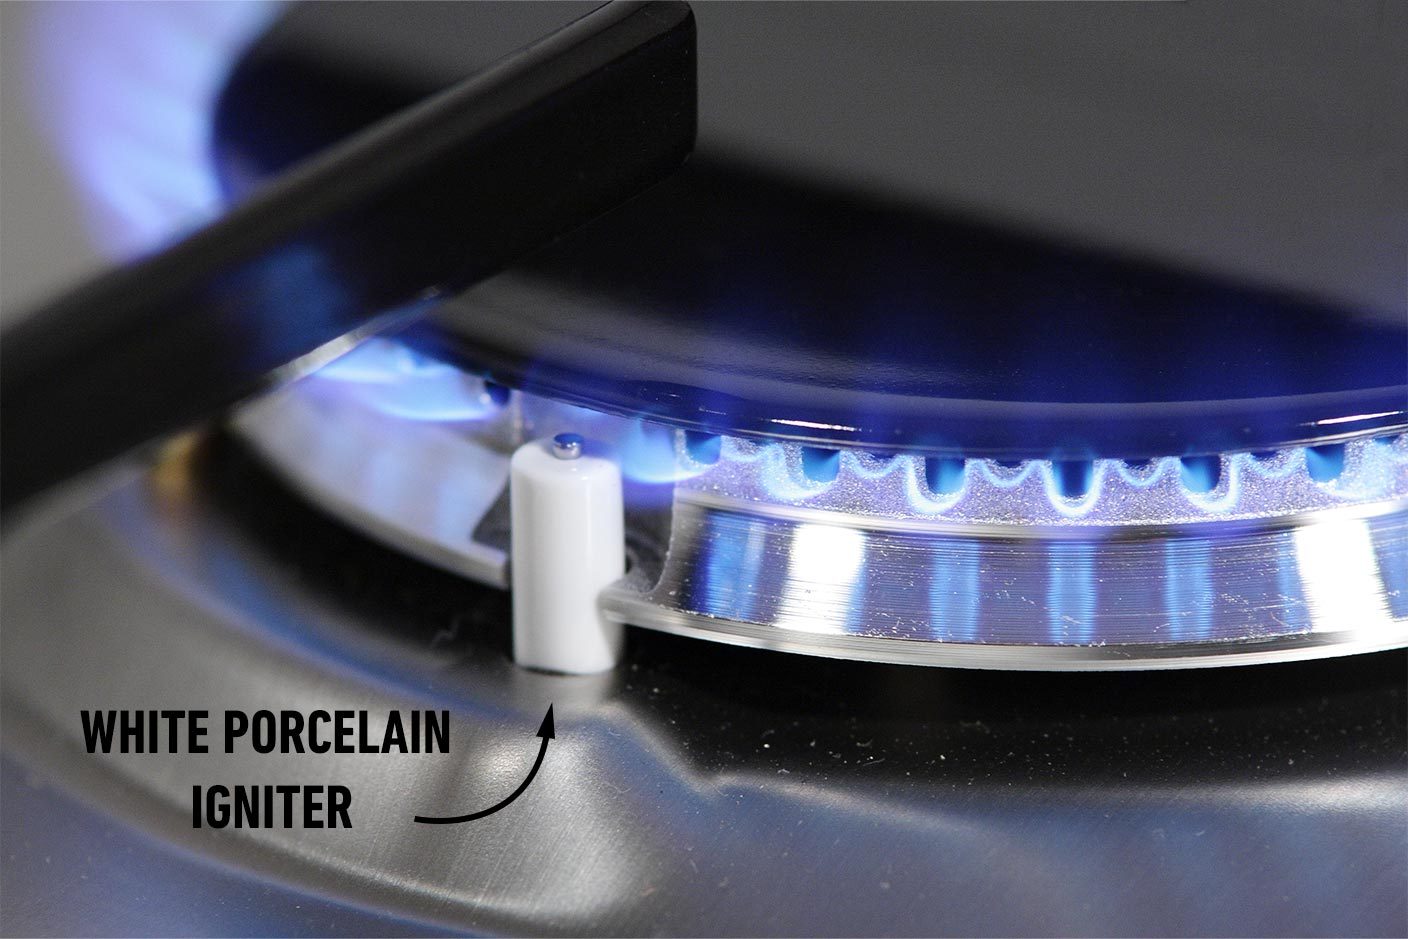 Gas Stove Not Getting Hot Enough? Here's How To Fix It - Fleet Appliance